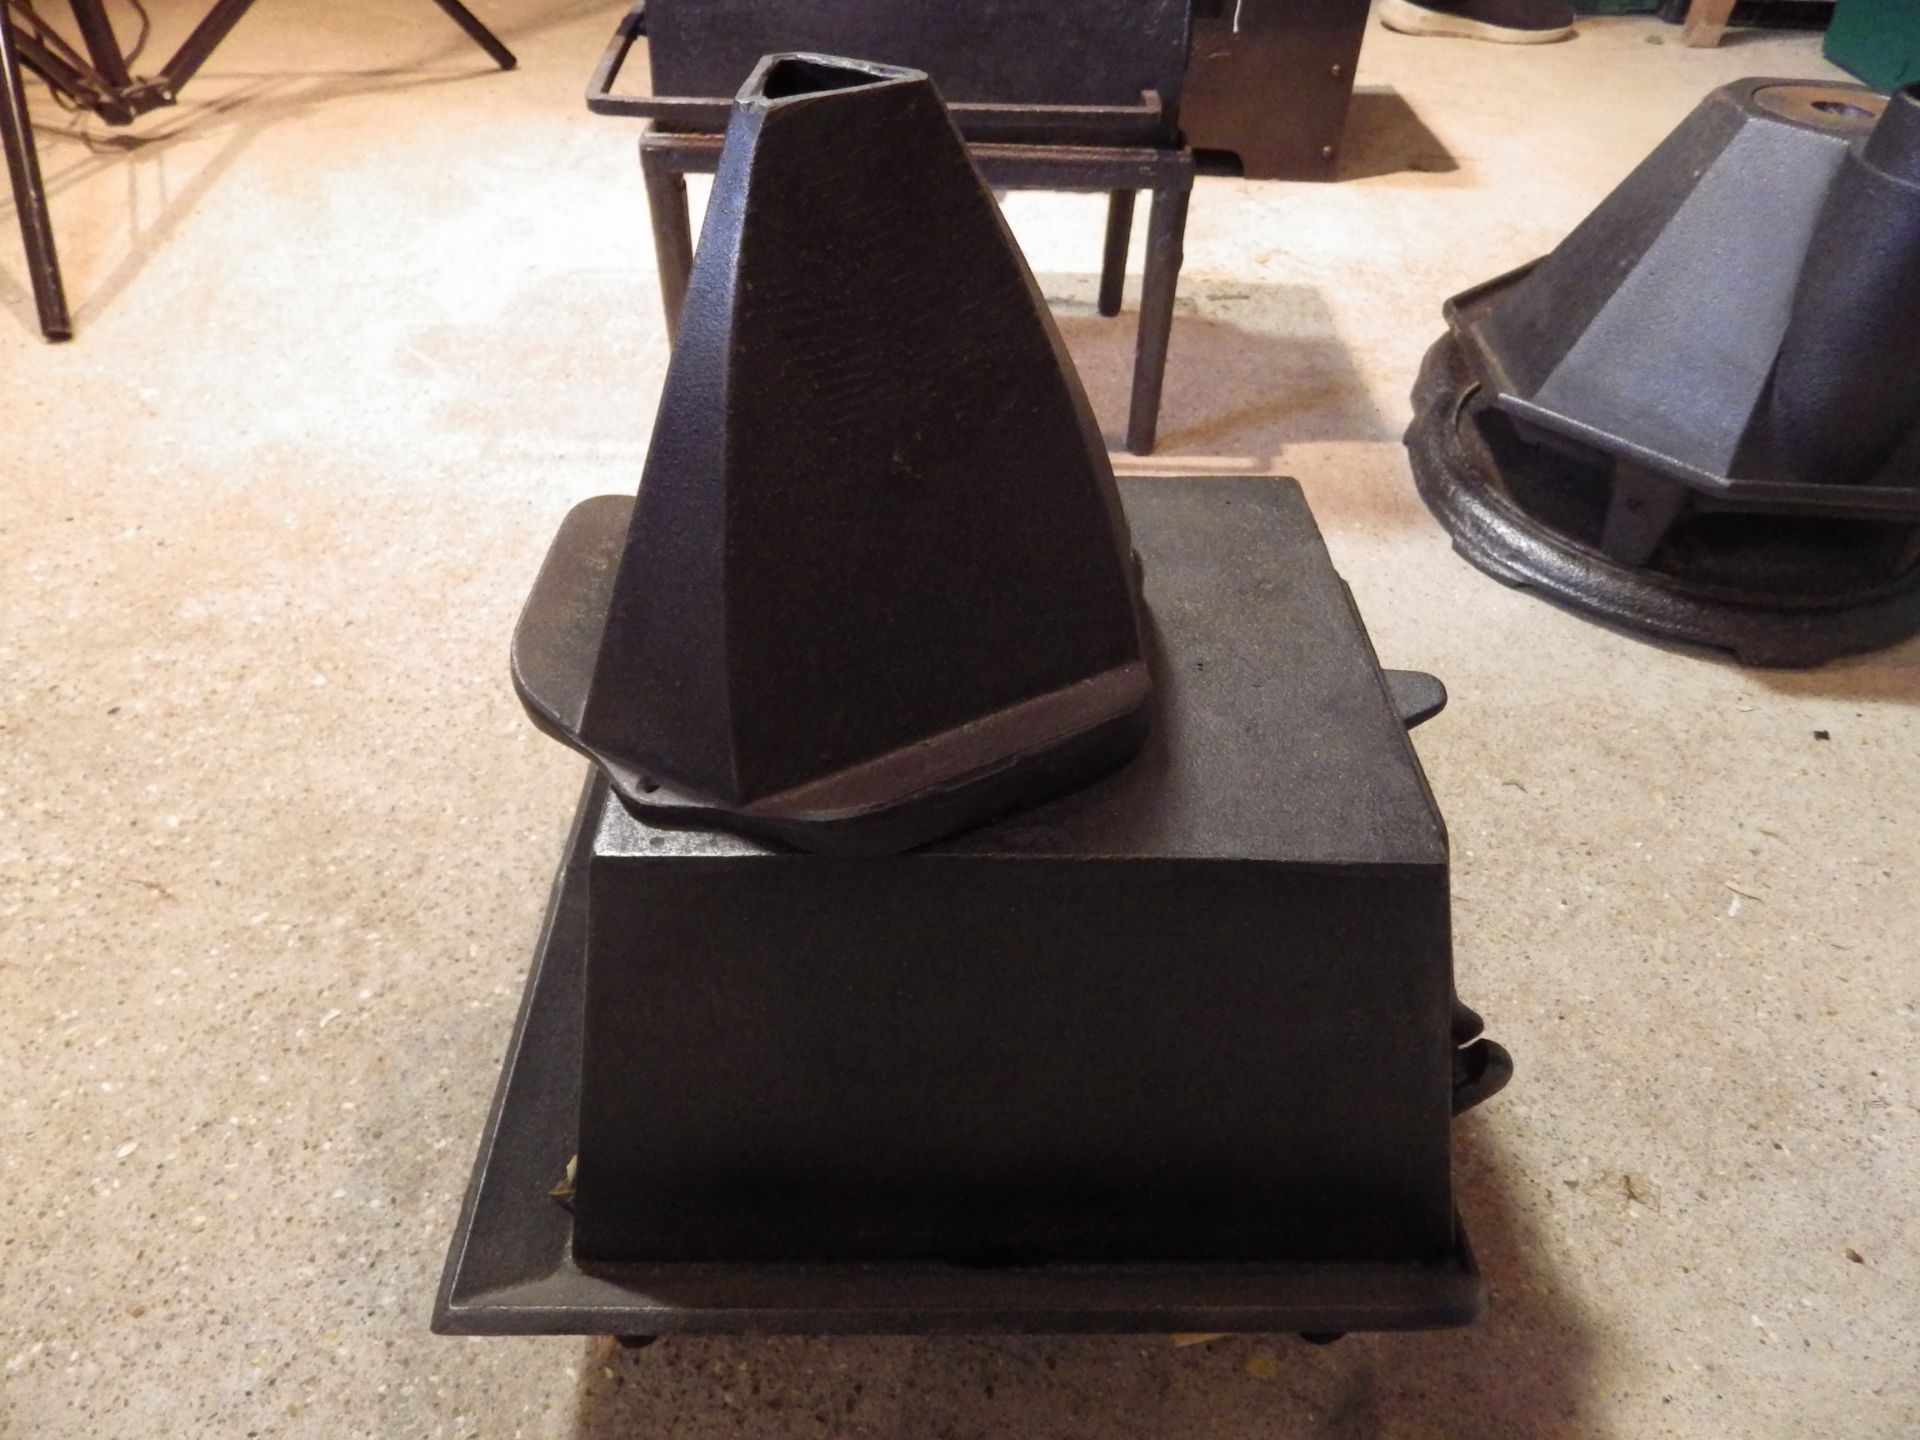 No.2 Squat cast iron stove with grate and hinged door and chimney flue stand rest for 3 irons - Image 3 of 4